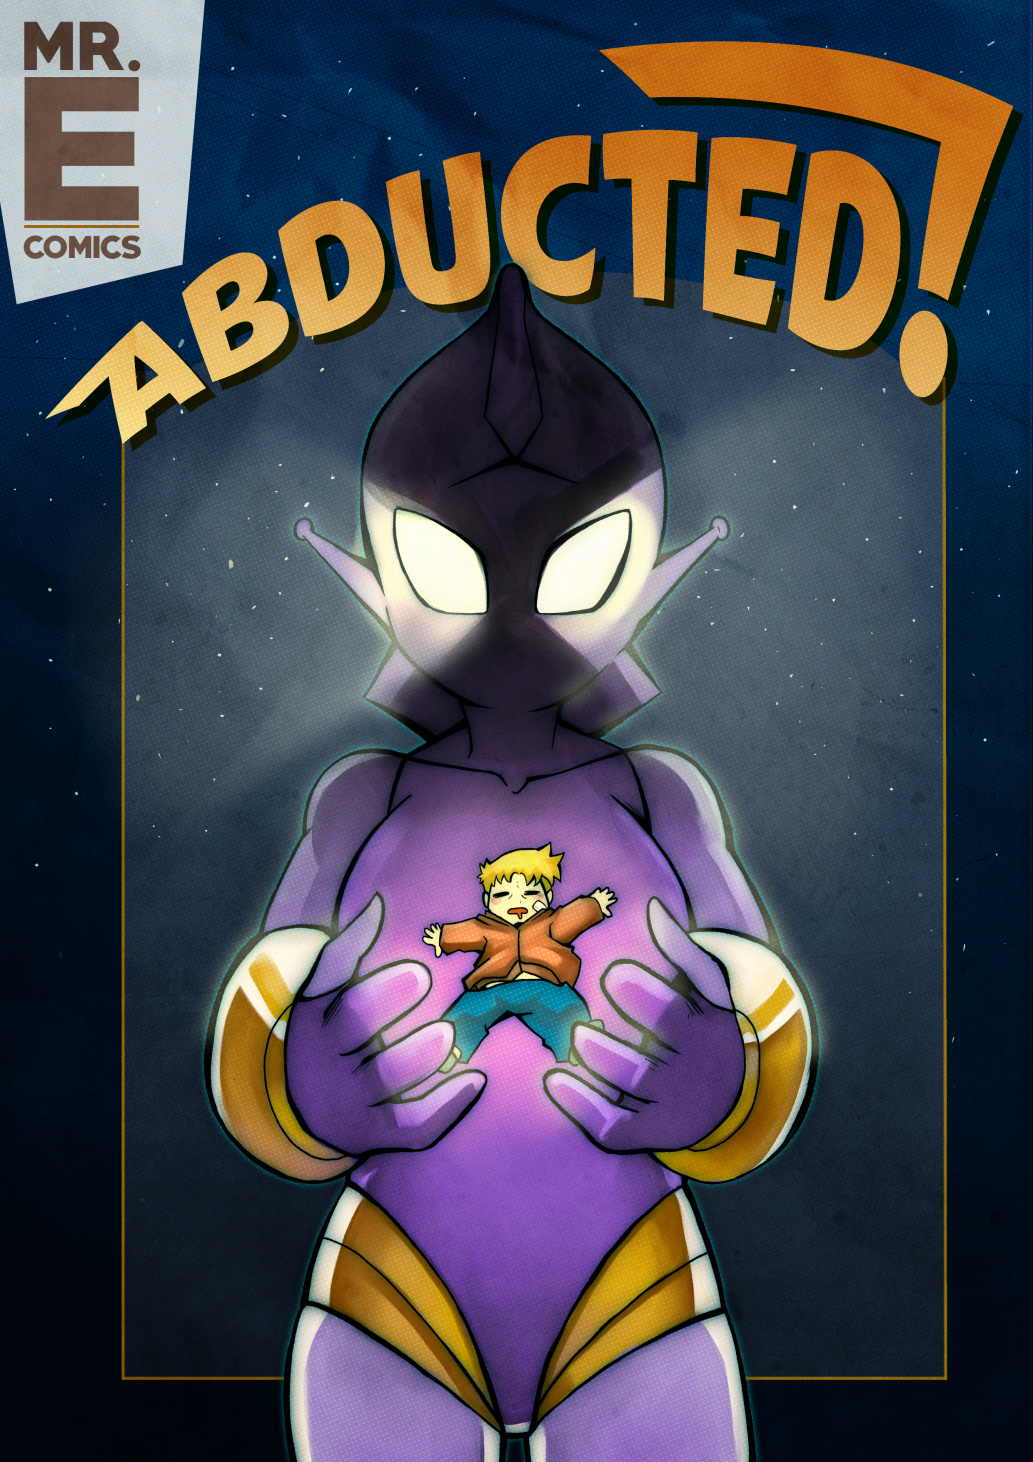 Abducted! - Mr.E porn comics Oral sex, Aliens, Blowjob, Creampie, Kidnapping, Stockings, Straight